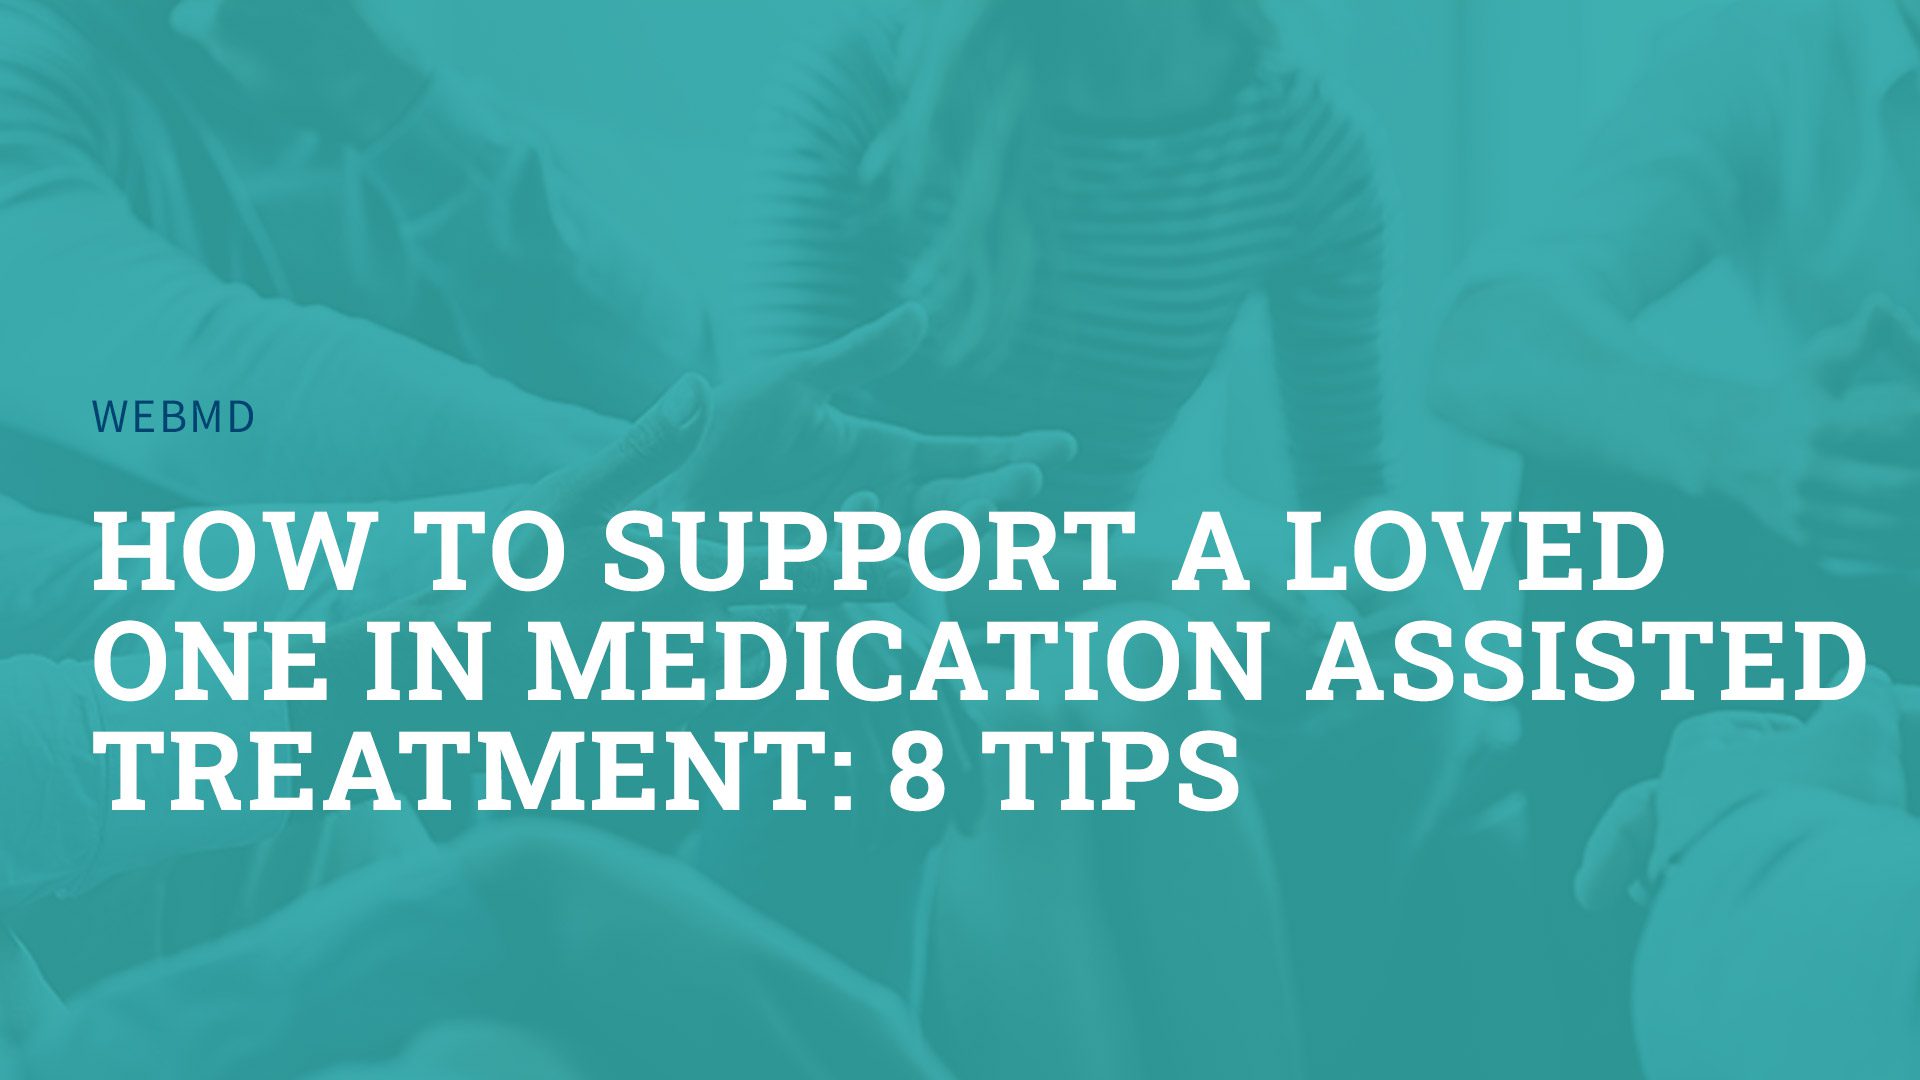 How To Support a Loved One in Medication Assisted Treatment: 8 Tips